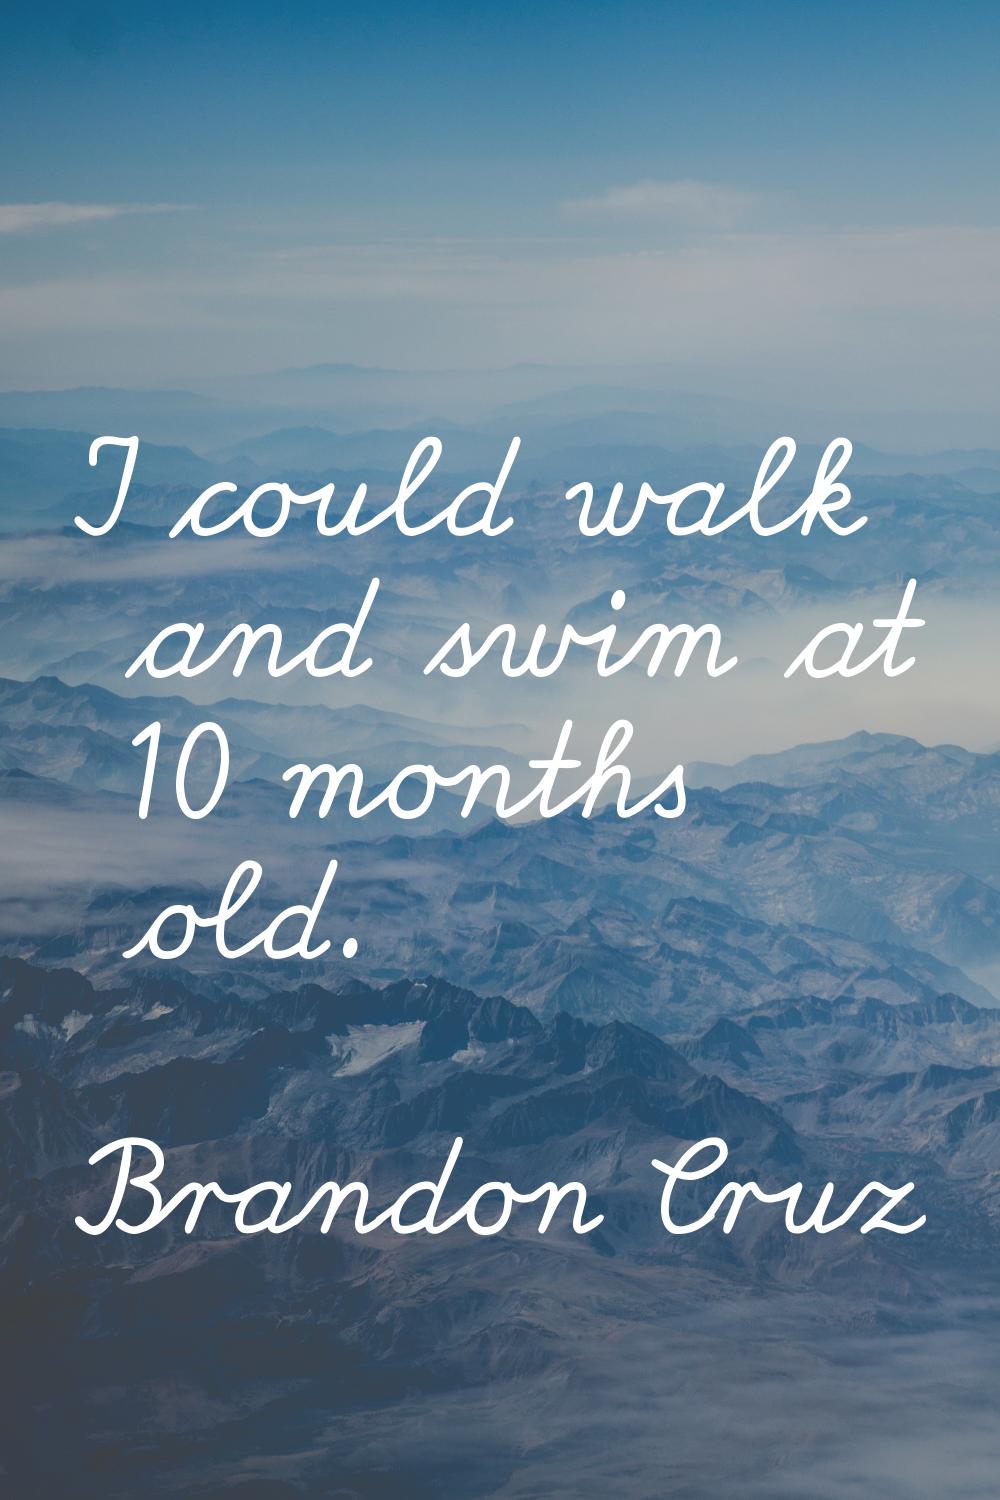 I could walk and swim at 10 months old.